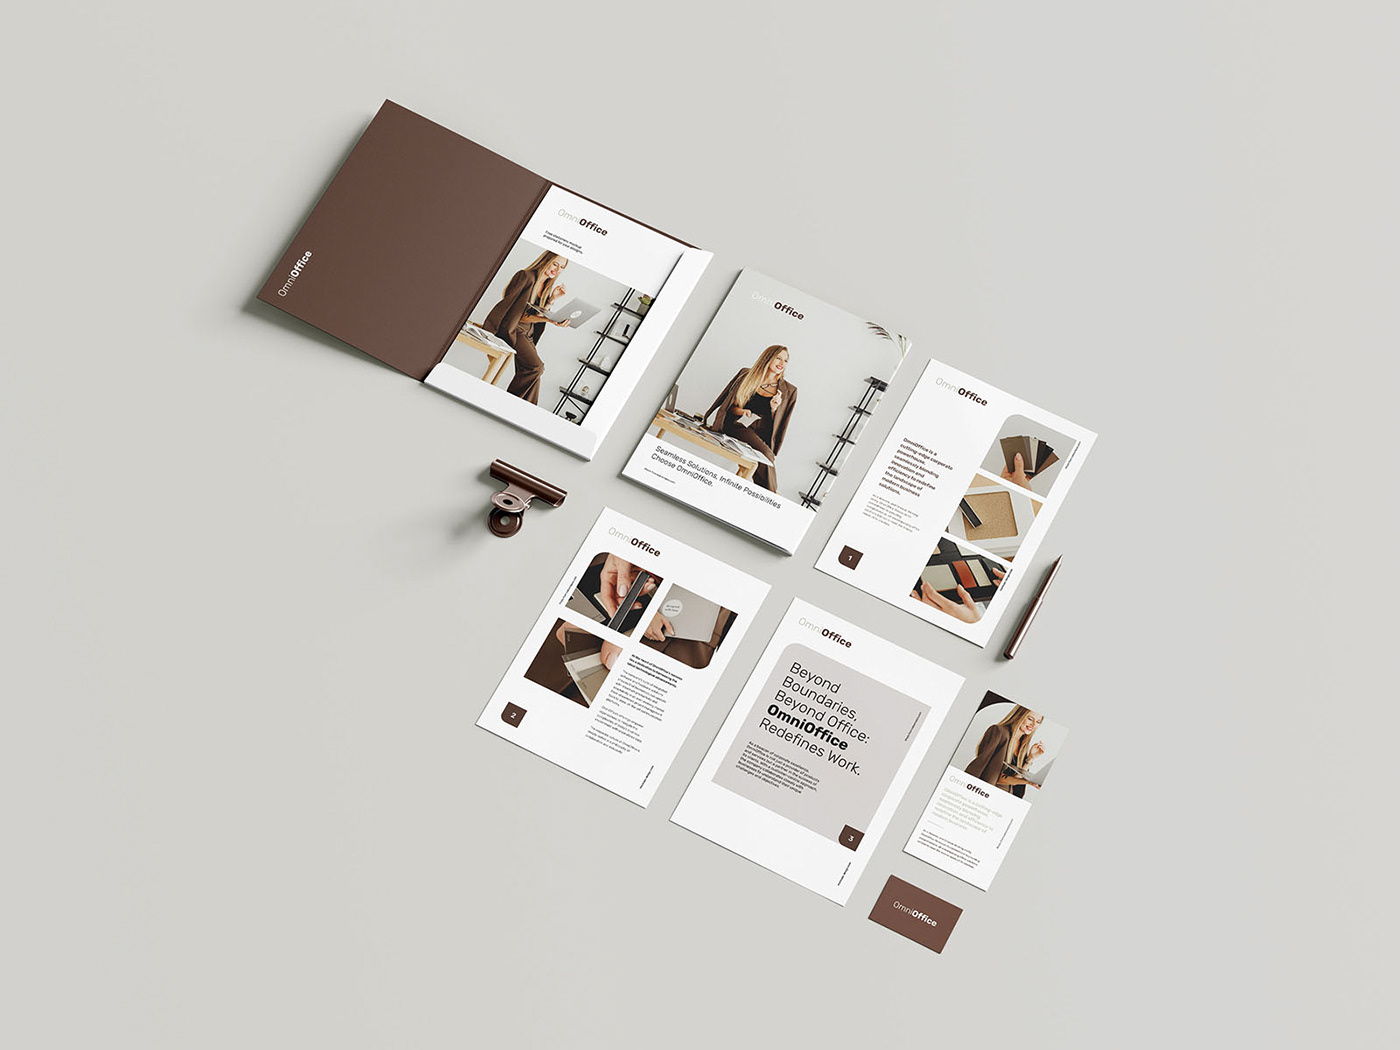 Mockup free template download psd Stationery brand branding  Corporate Identity business card